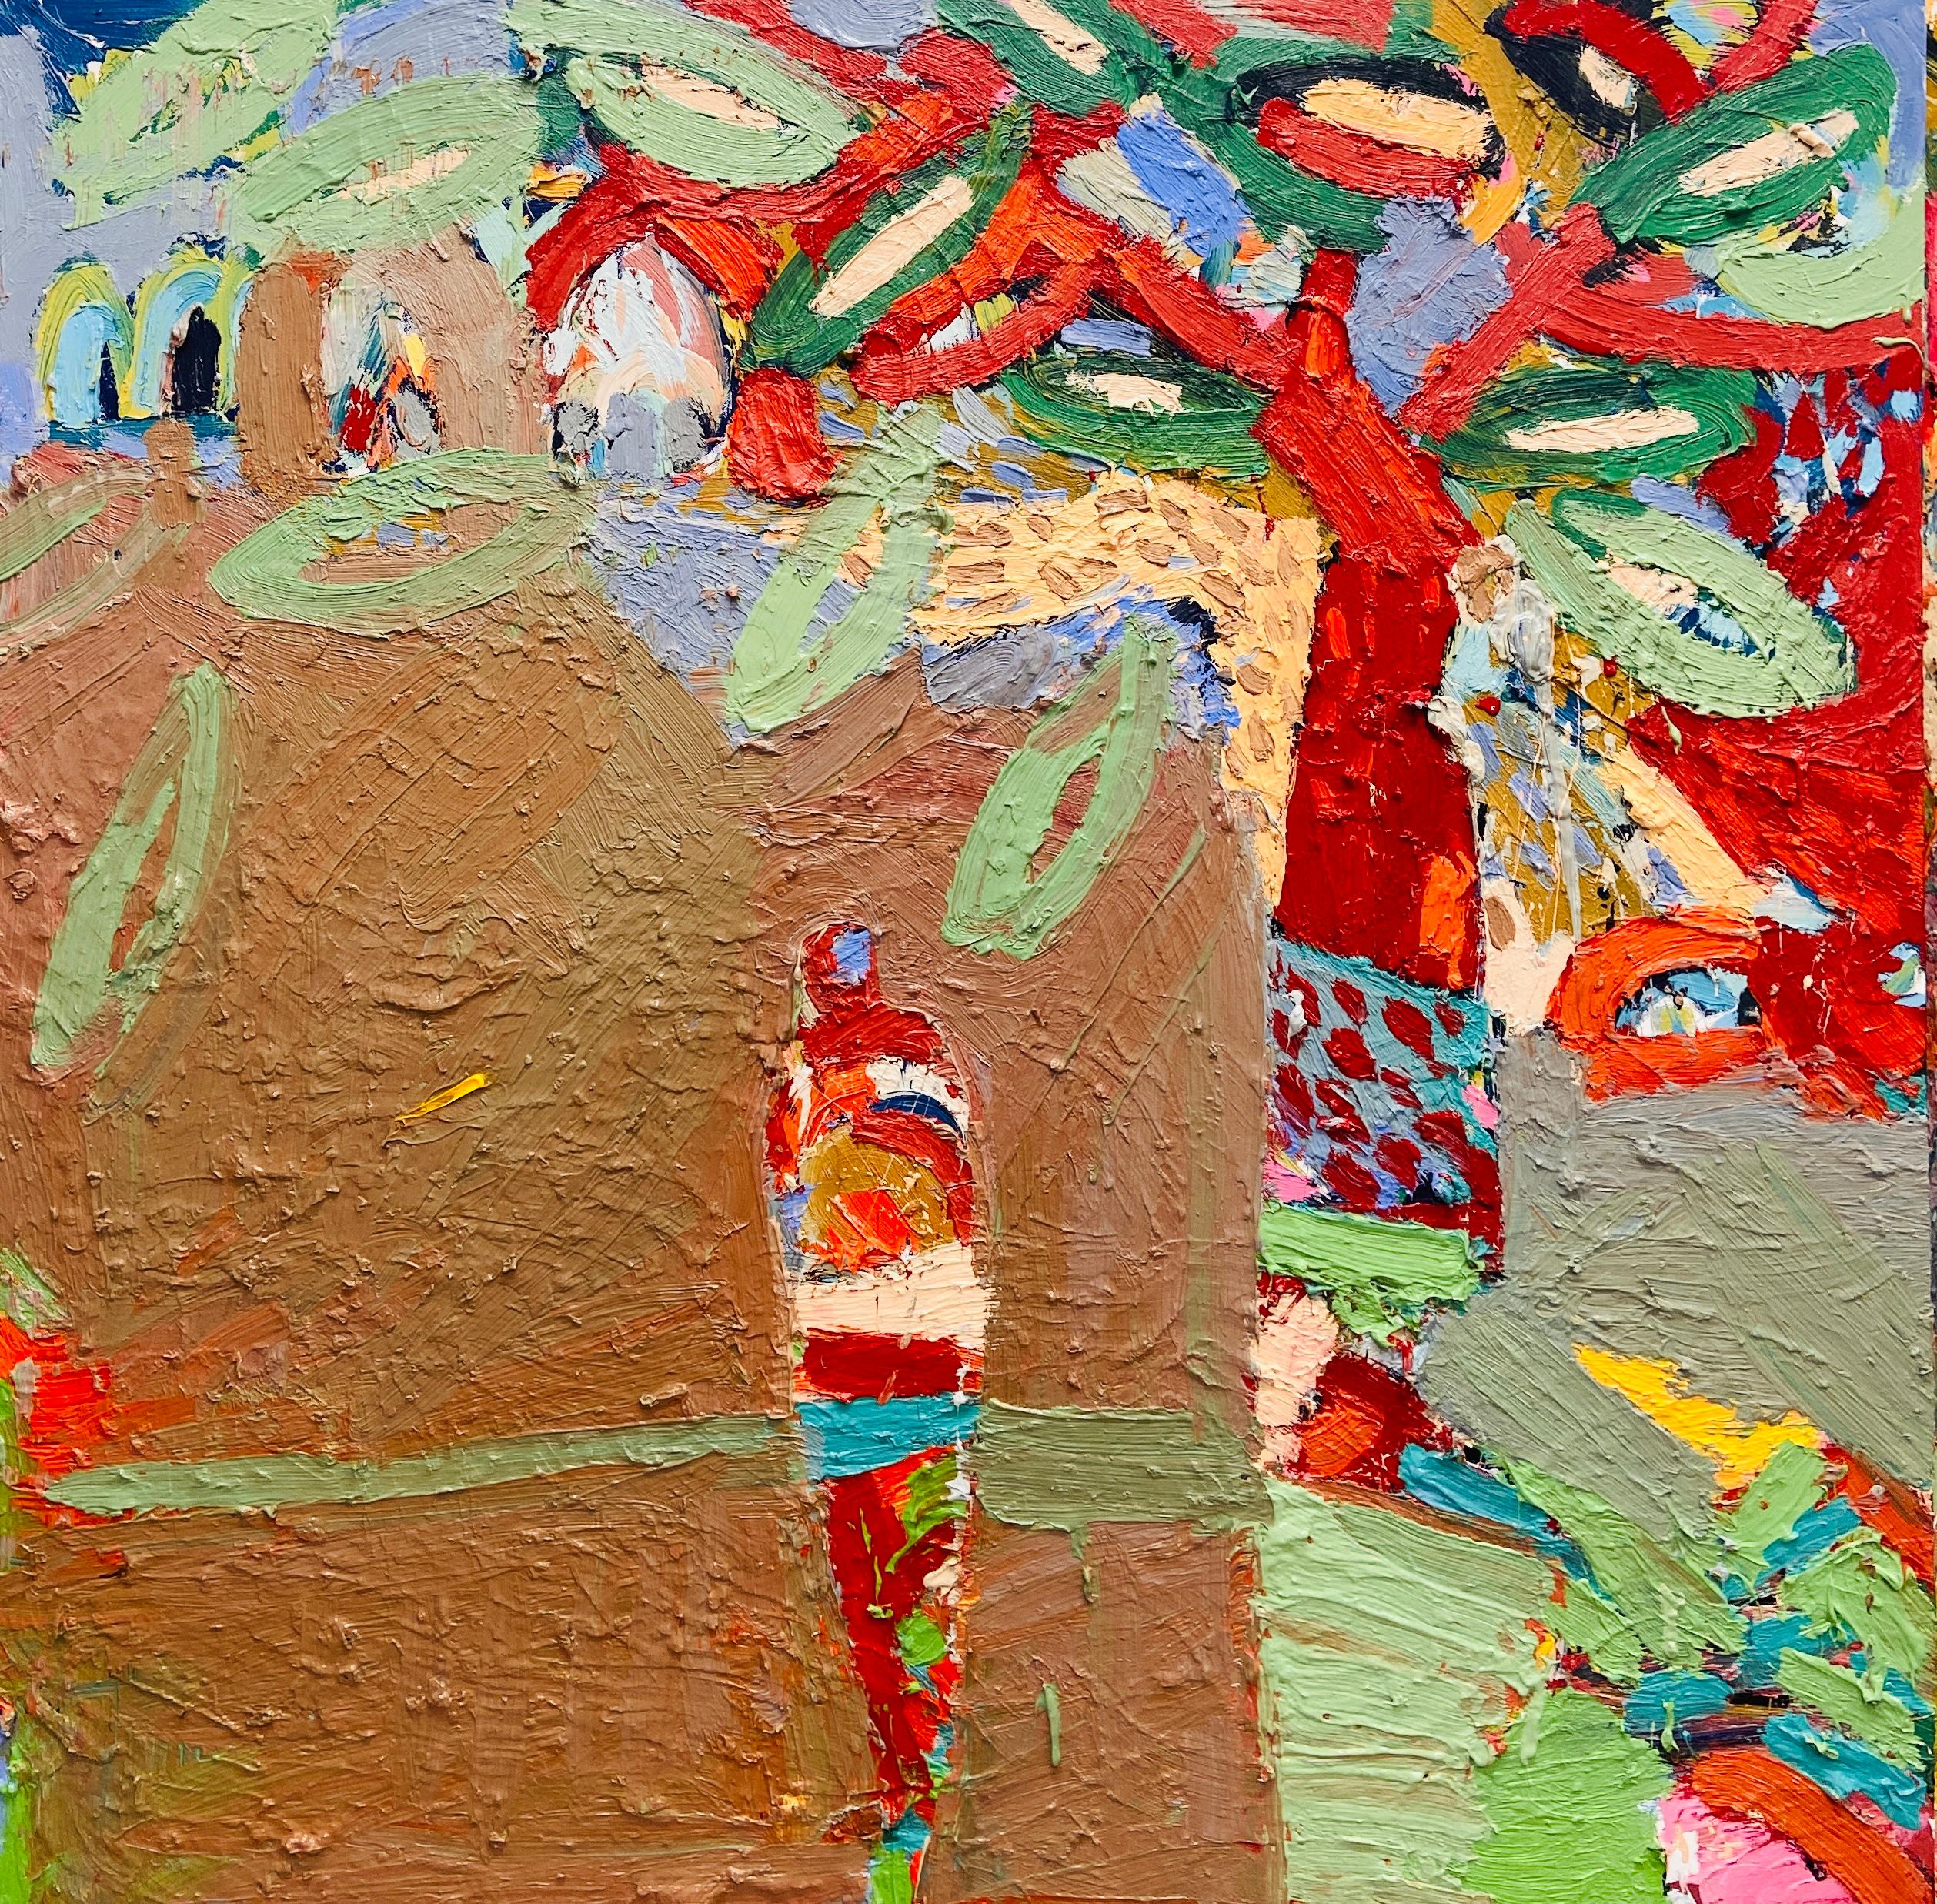 Paul wadsworth Figurative Painting - Standing By The Red River Tree   Contemporary Expressionist Oil Painting